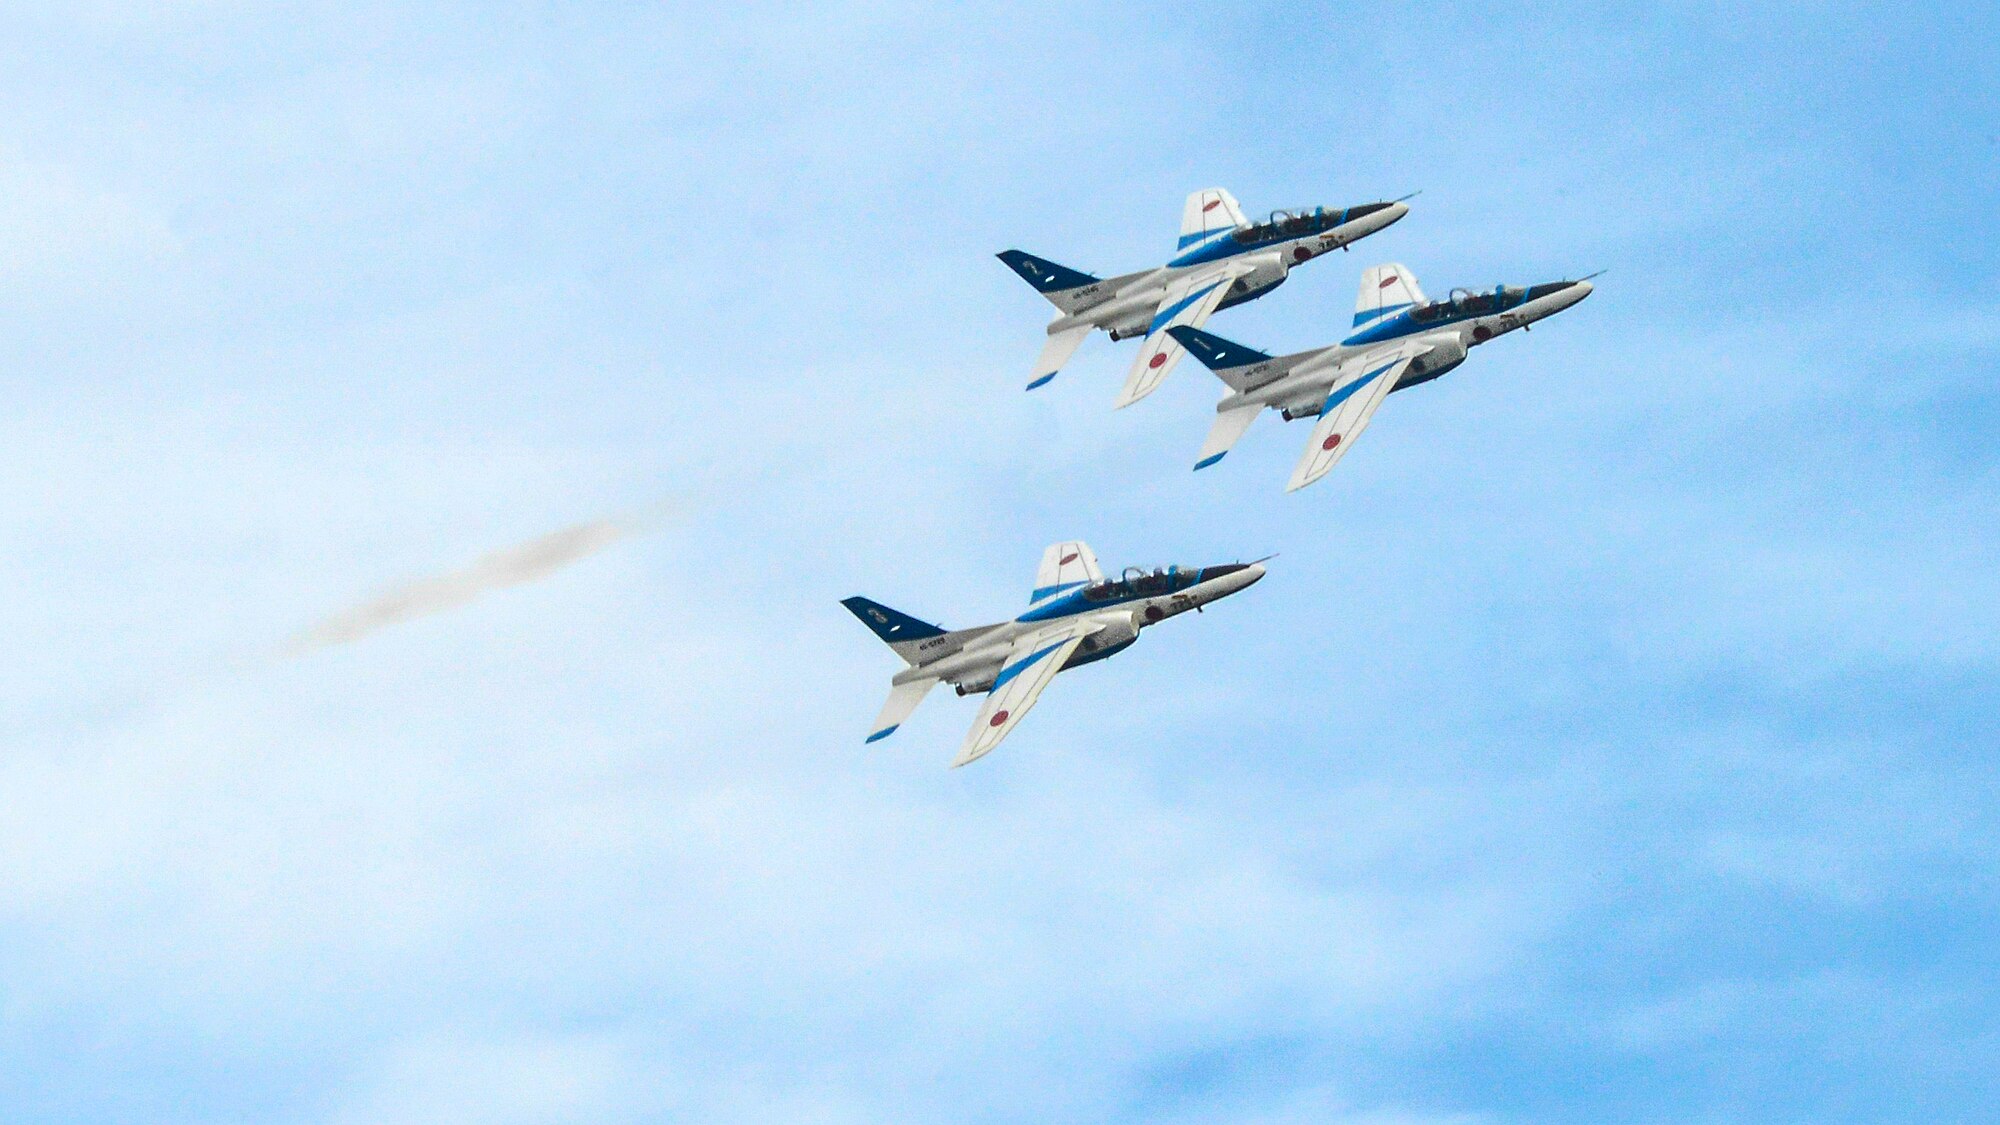 The Japan Air Self-Defense Force aerobatic team, Blue Impulse, flies in a formation during the annual Iruma Air Show at Iruma Air Base, Japan, Nov. 3, 2013. Blue Impulse demonstrated several maneuvers in the sky to entertain the guests.  (U.S. Air Force photo by Airman 1st Class Soo C. Kim / Released)